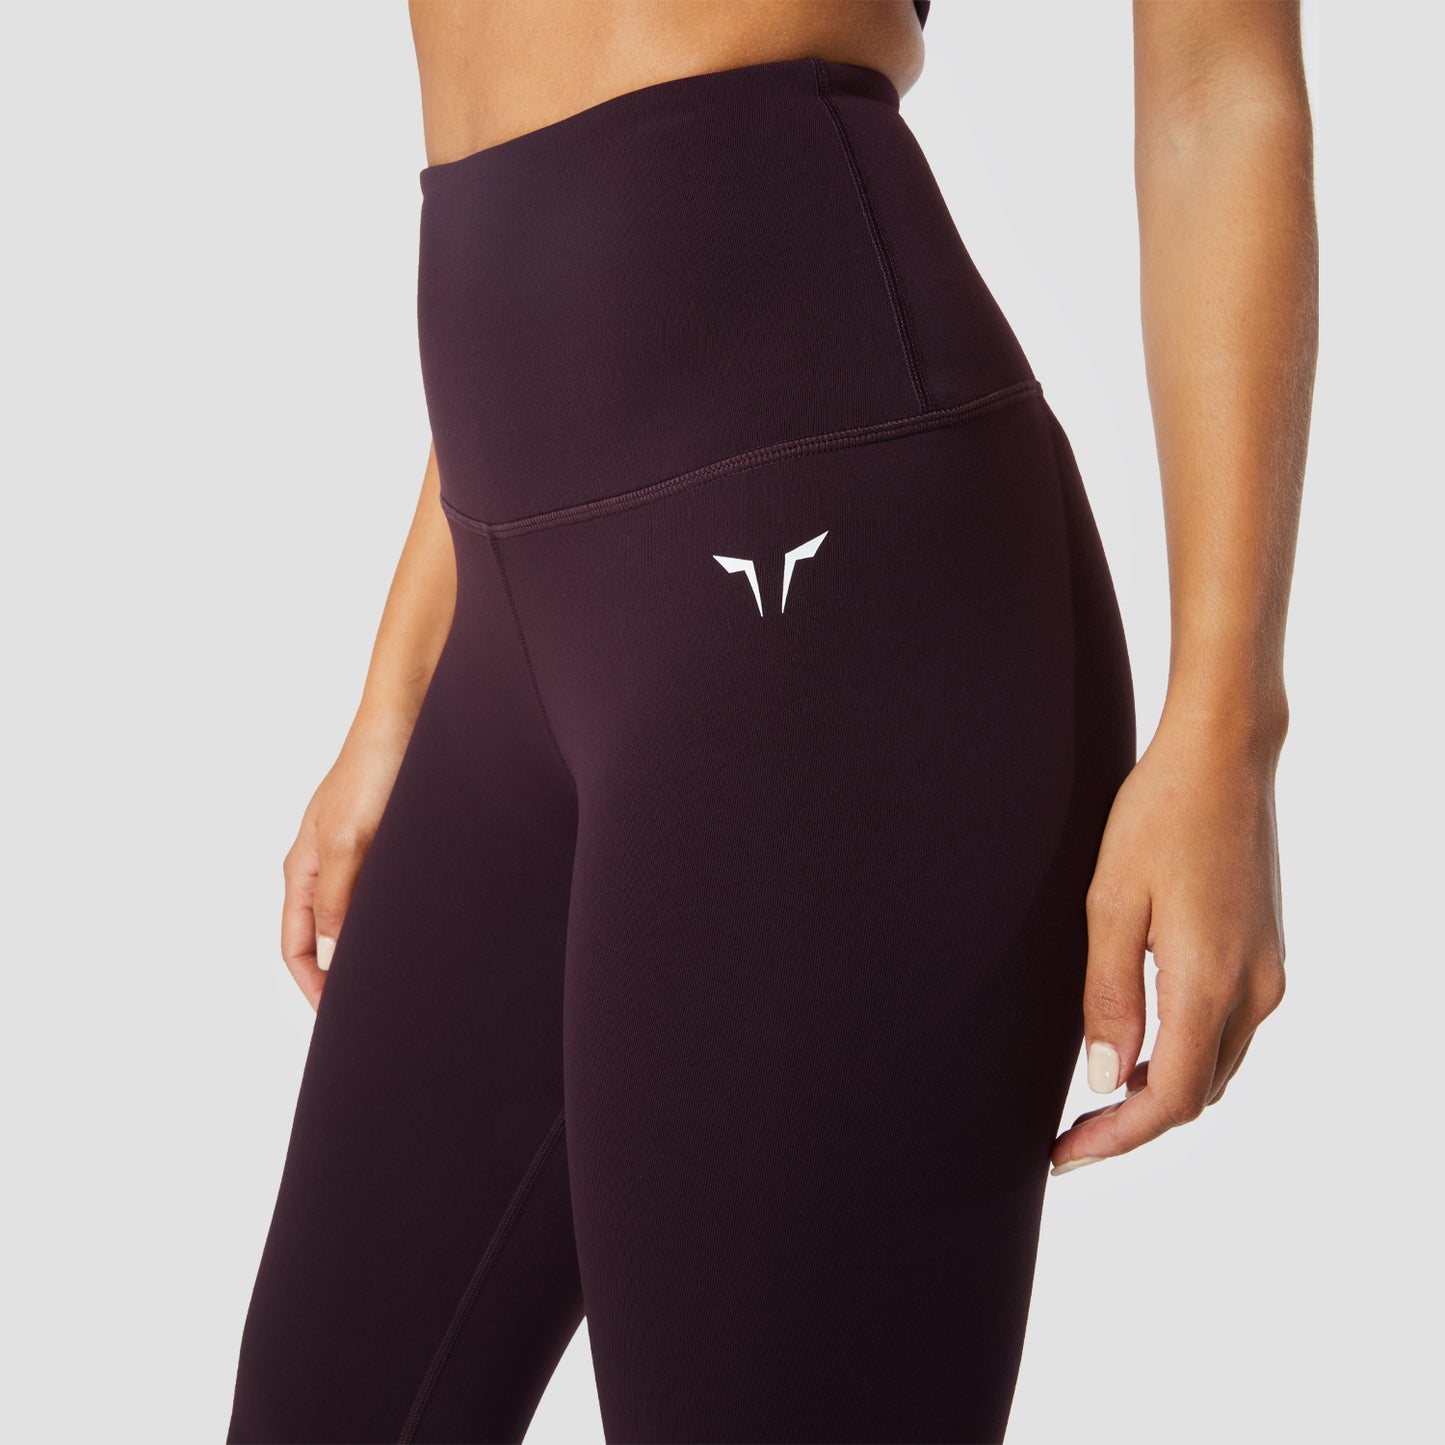 squatwolf-workout-clothes-hera-high-waisted-leggings-purple-gym-leggings-for-women